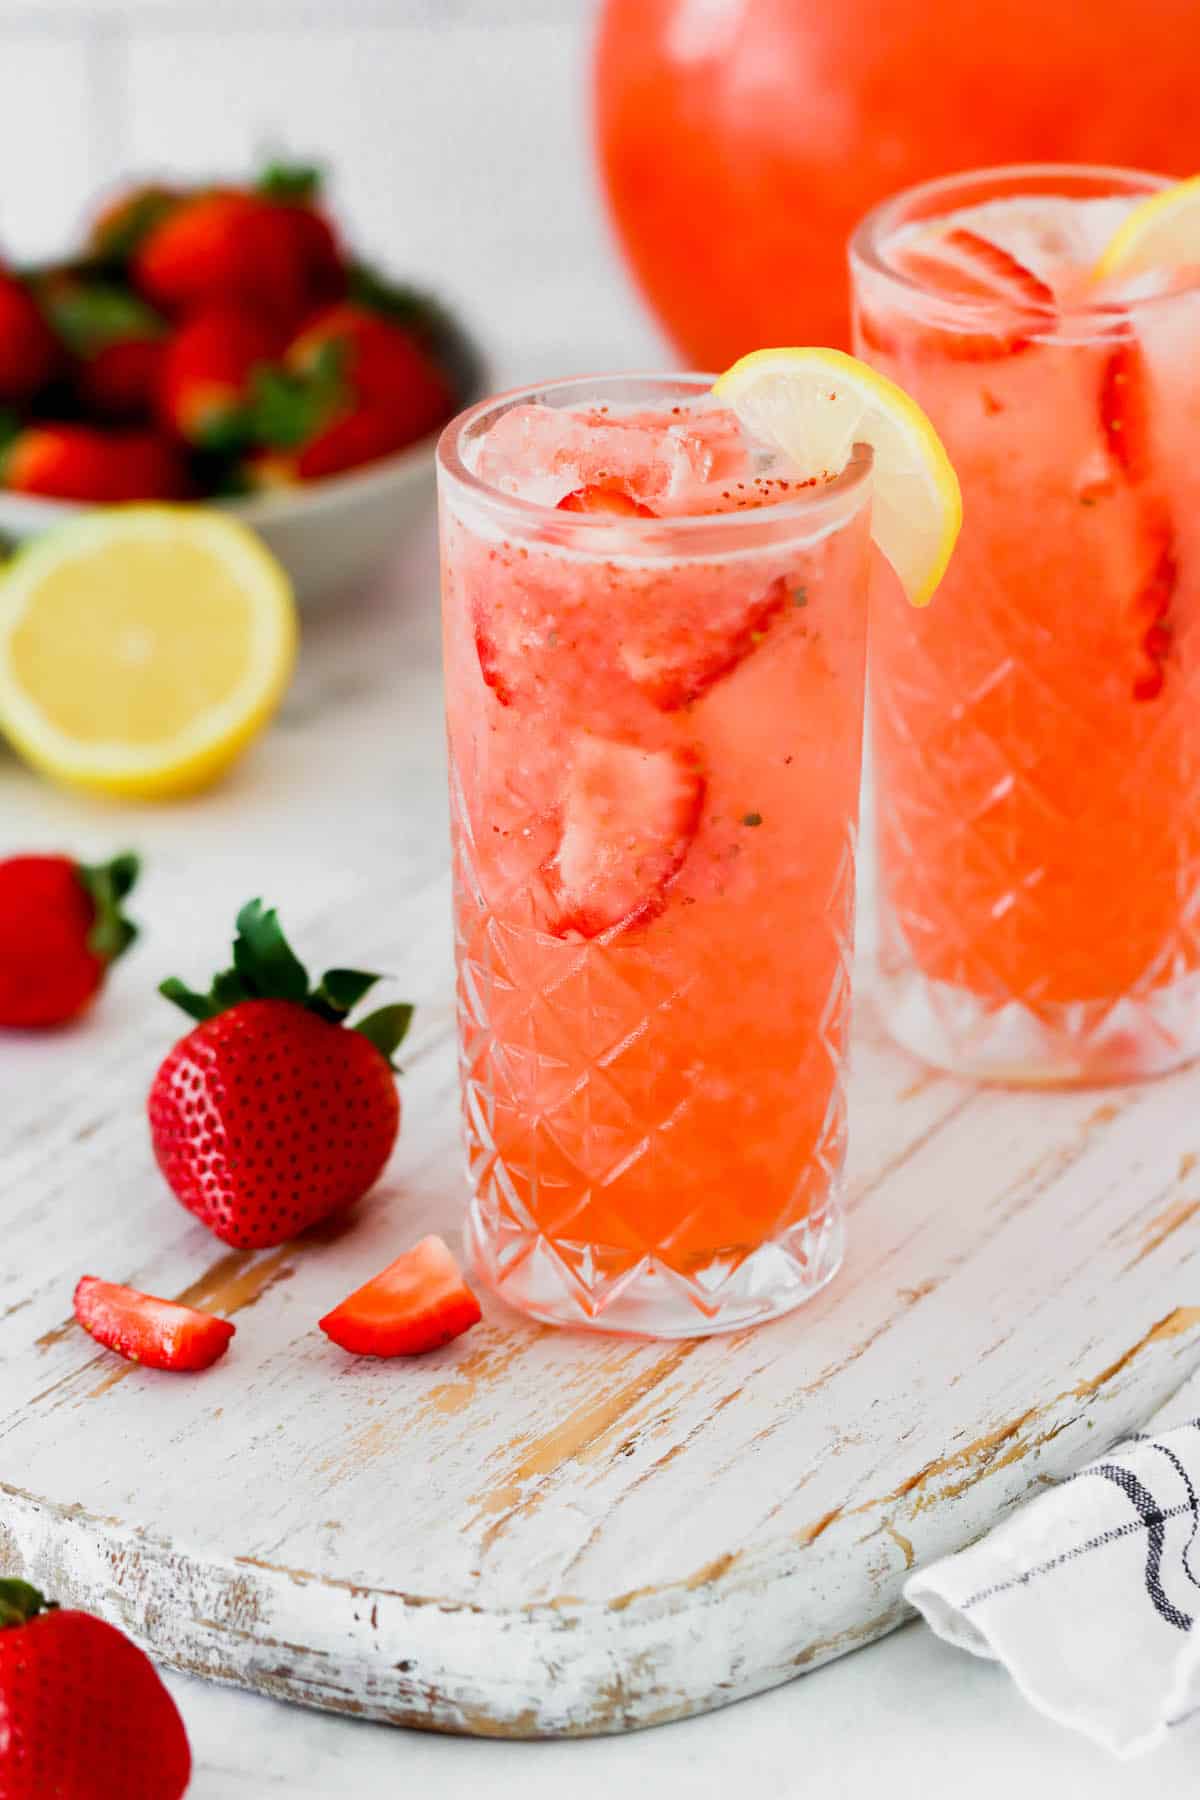 A glass of strawberry lemonade garnished with strawberry slices and a lemon wedge